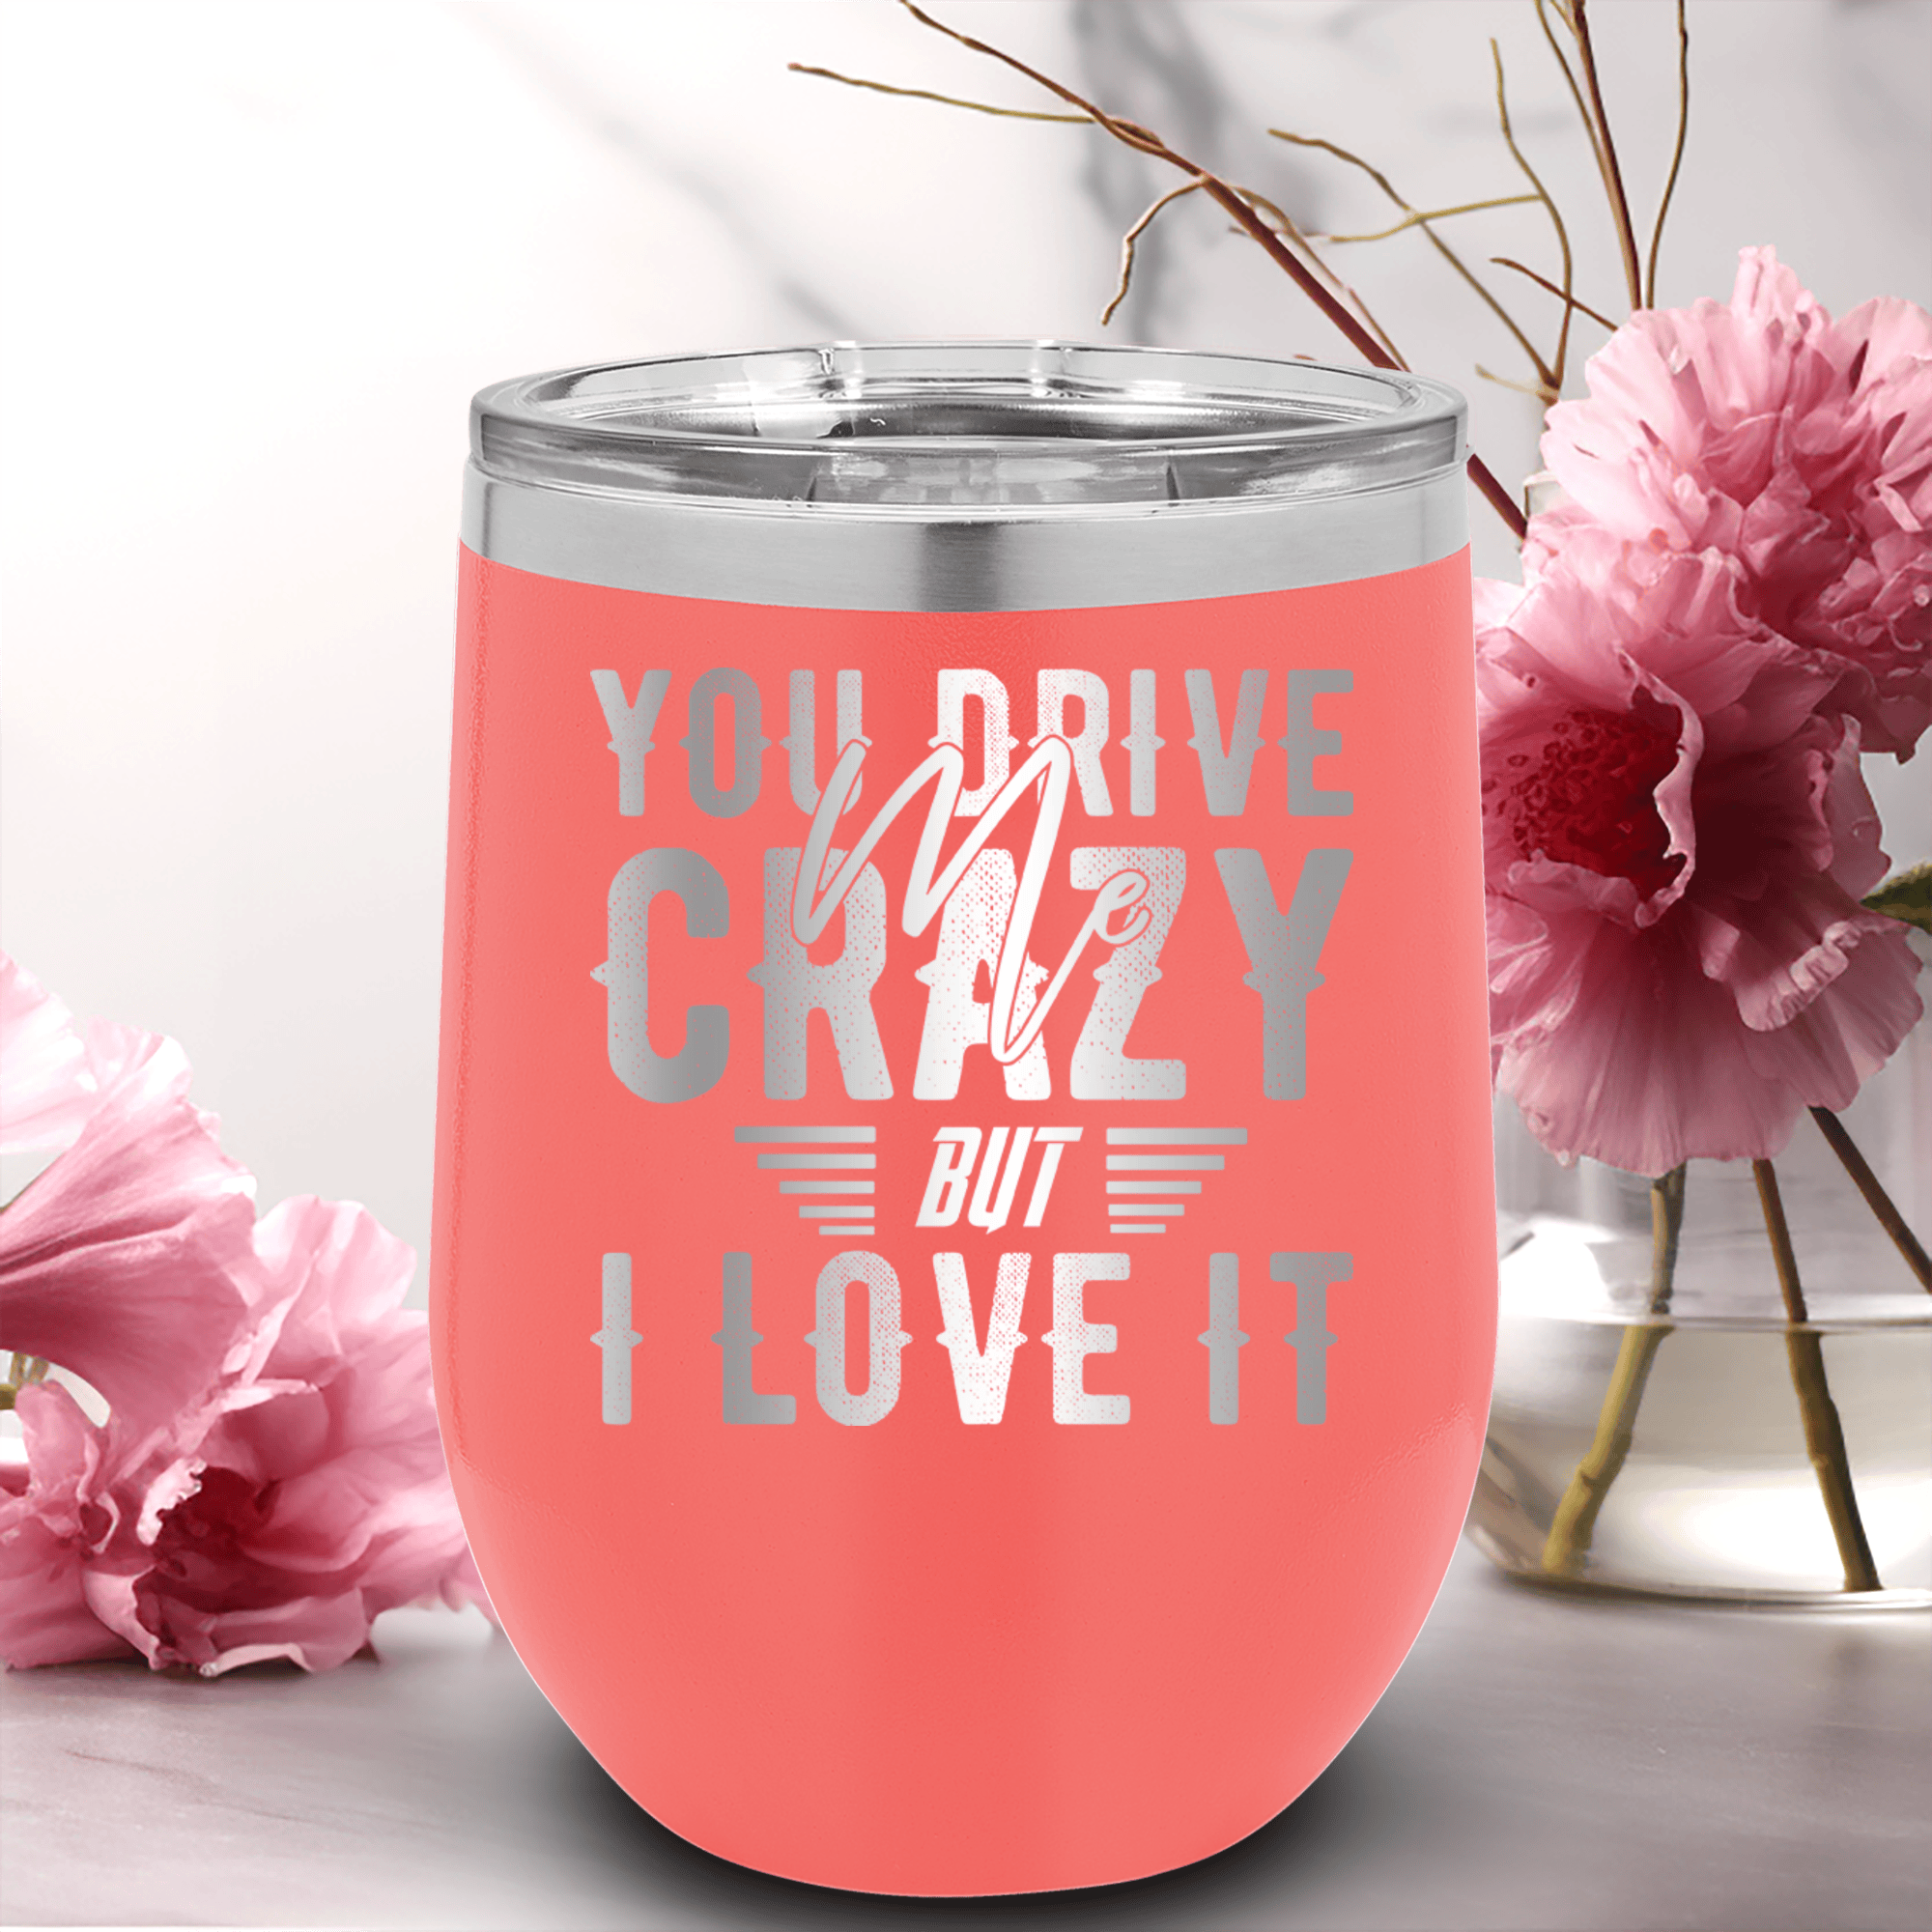 Salmon Best Friends Wine Tumbler With You Drive Me Crazy But I Love You Design